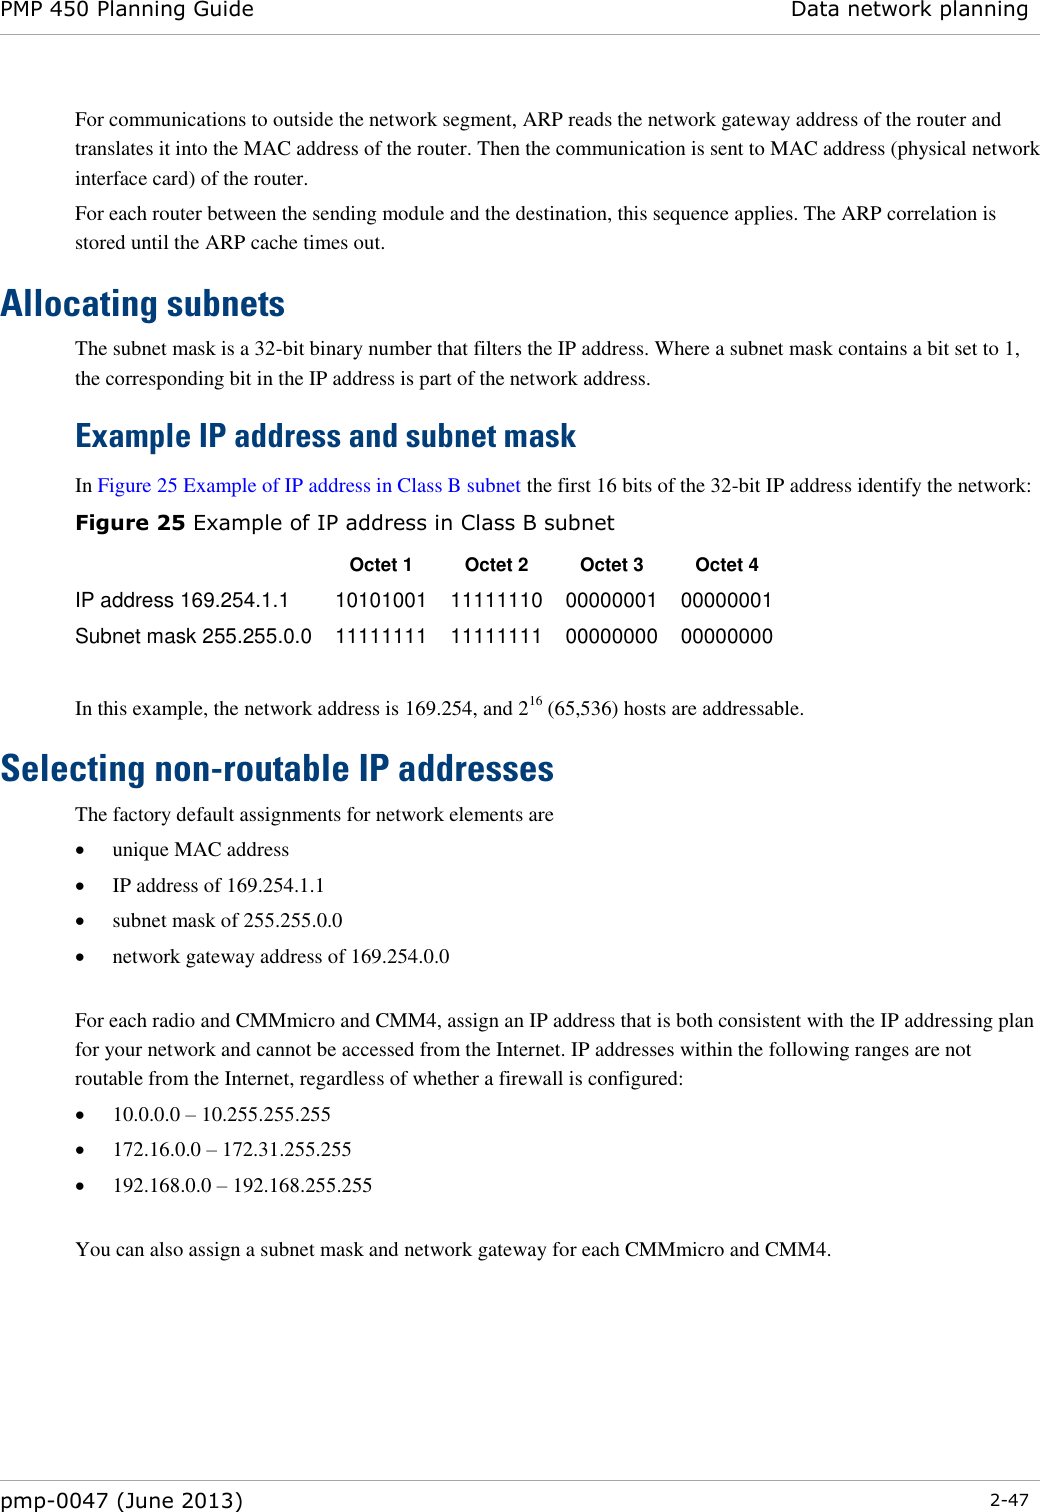 PMP 450 Planning Guide Data network planning  pmp-0047 (June 2013)  2-47  For communications to outside the network segment, ARP reads the network gateway address of the router and translates it into the MAC address of the router. Then the communication is sent to MAC address (physical network interface card) of the router. For each router between the sending module and the destination, this sequence applies. The ARP correlation is stored until the ARP cache times out. Allocating subnets The subnet mask is a 32-bit binary number that filters the IP address. Where a subnet mask contains a bit set to 1, the corresponding bit in the IP address is part of the network address.    Example IP address and subnet mask In Figure 25 Example of IP address in Class B subnet the first 16 bits of the 32-bit IP address identify the network: Figure 25 Example of IP address in Class B subnet  Octet 1 Octet 2 Octet 3 Octet 4 IP address 169.254.1.1 10101001 11111110 00000001 00000001 Subnet mask 255.255.0.0 11111111 11111111 00000000 00000000  In this example, the network address is 169.254, and 216 (65,536) hosts are addressable.  Selecting non-routable IP addresses The factory default assignments for network elements are  unique MAC address  IP address of 169.254.1.1  subnet mask of 255.255.0.0  network gateway address of 169.254.0.0  For each radio and CMMmicro and CMM4, assign an IP address that is both consistent with the IP addressing plan for your network and cannot be accessed from the Internet. IP addresses within the following ranges are not routable from the Internet, regardless of whether a firewall is configured:  10.0.0.0 – 10.255.255.255  172.16.0.0 – 172.31.255.255  192.168.0.0 – 192.168.255.255  You can also assign a subnet mask and network gateway for each CMMmicro and CMM4. 